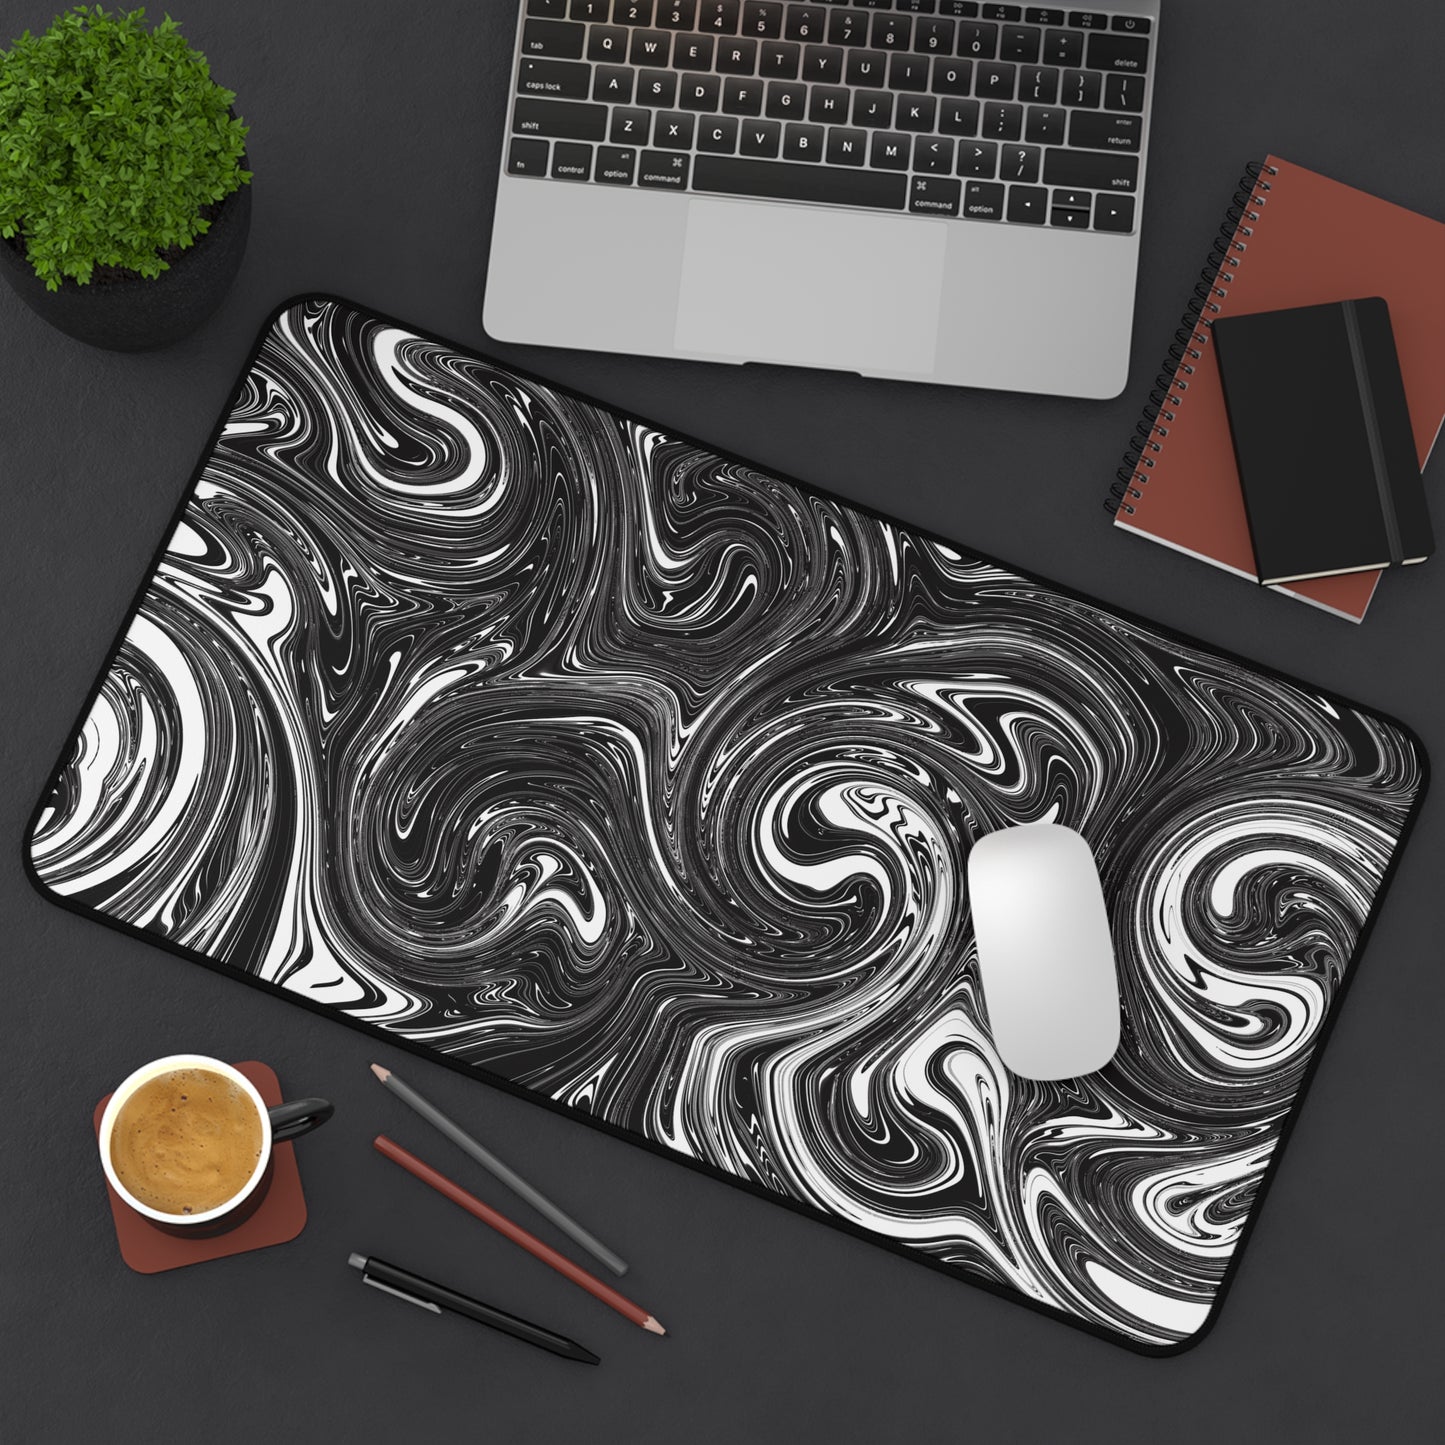 A 12" x 22" desk mat with black and white swirls sitting at an angle.